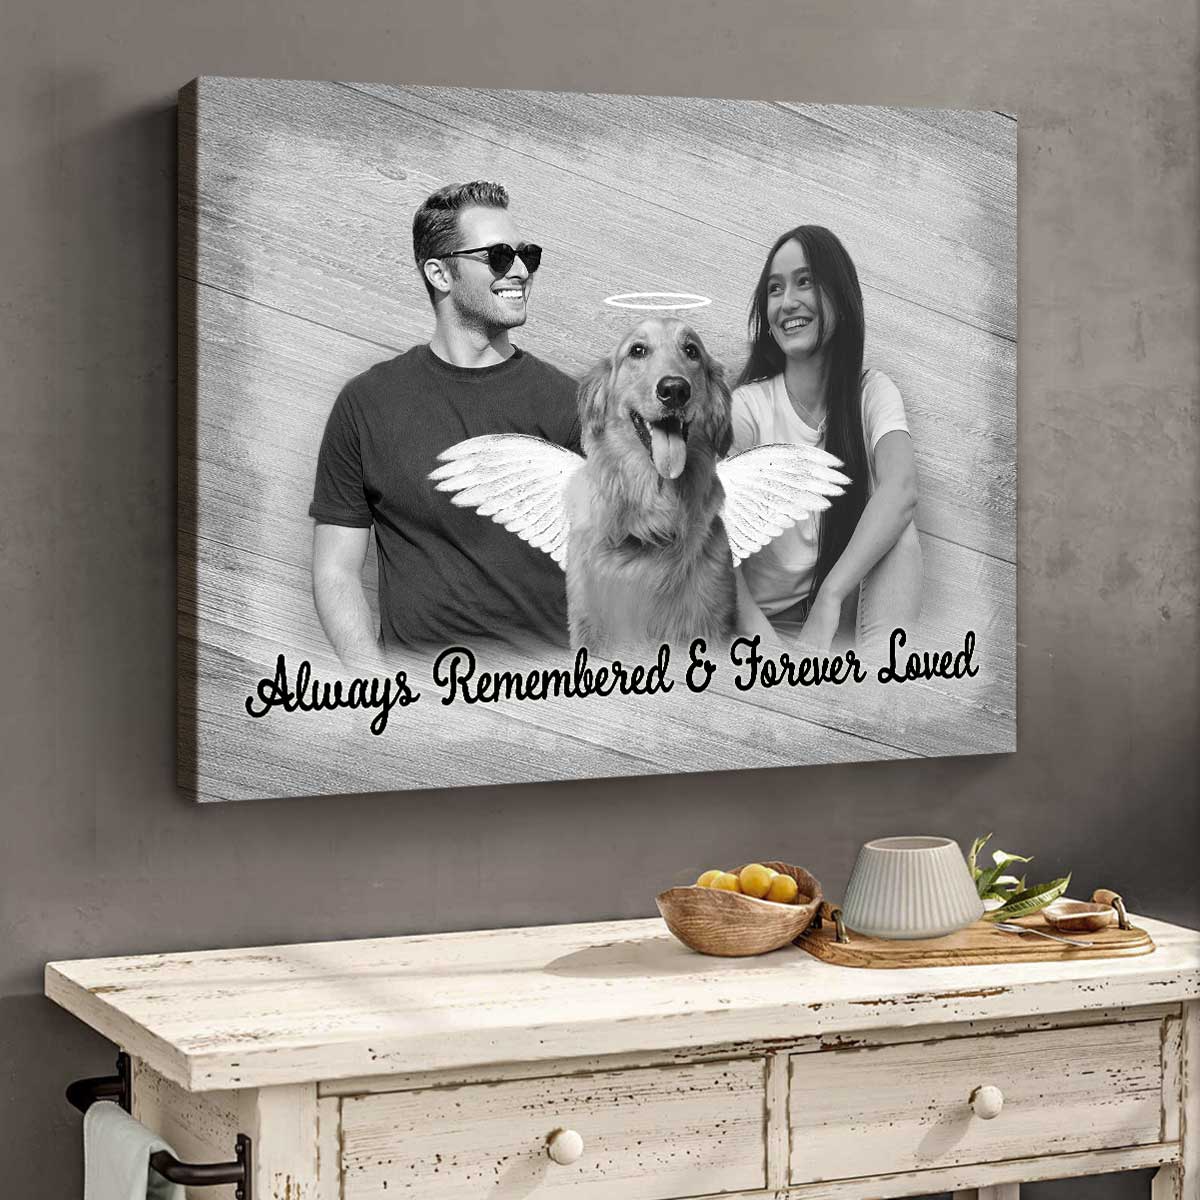 Pet Loss Memorial Portrait Canvas With Angel Wings And Halo, Add Deceased Pet To Photo, Pet Memorial Gifts